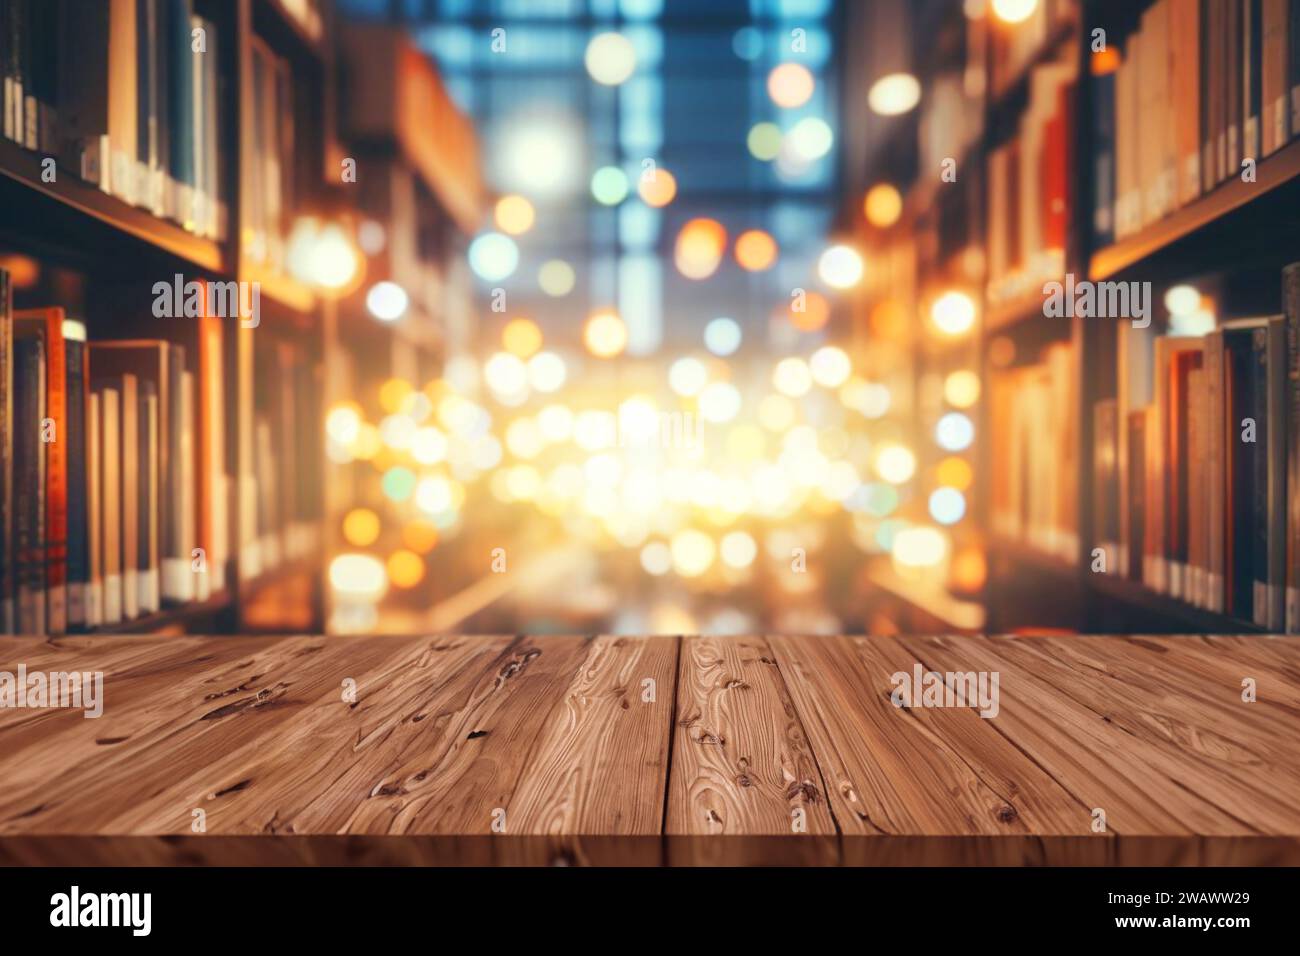 blur bookshelves school library bokeh lights beautiful like fairy tale dream background with wooden foreground for montage graphic element. Stock Photo